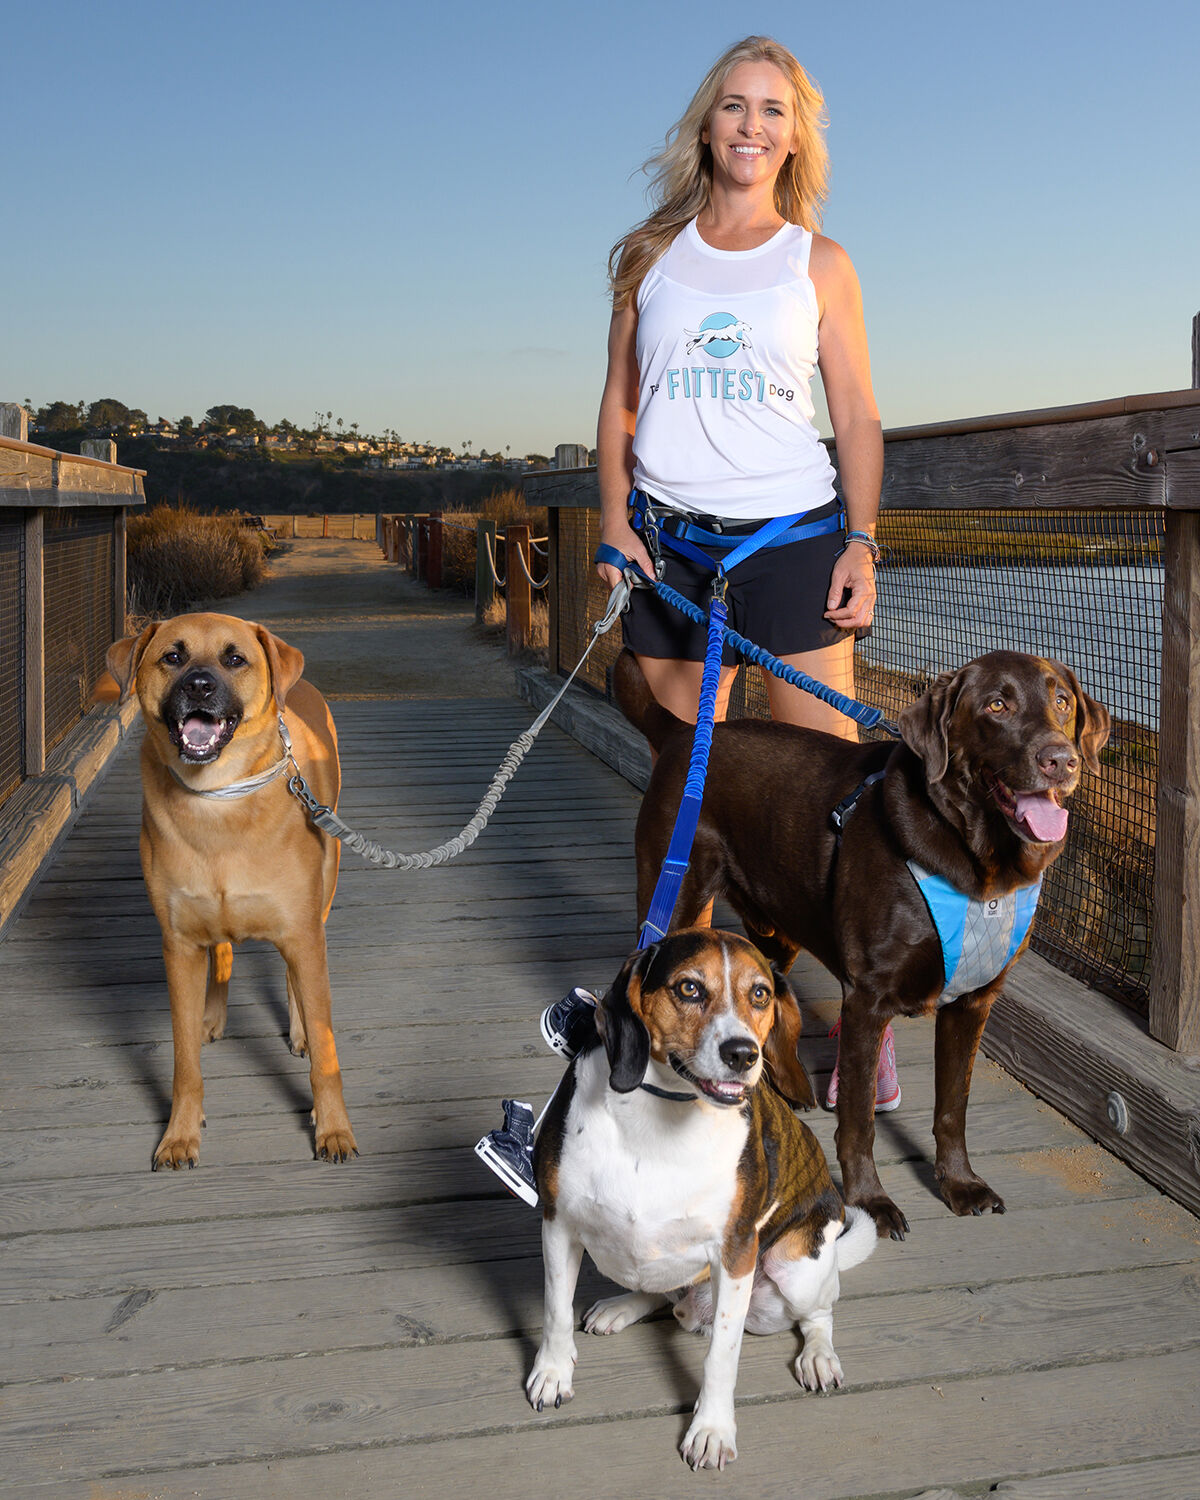 Faces of San Diego 2021 / The Fittest Dog